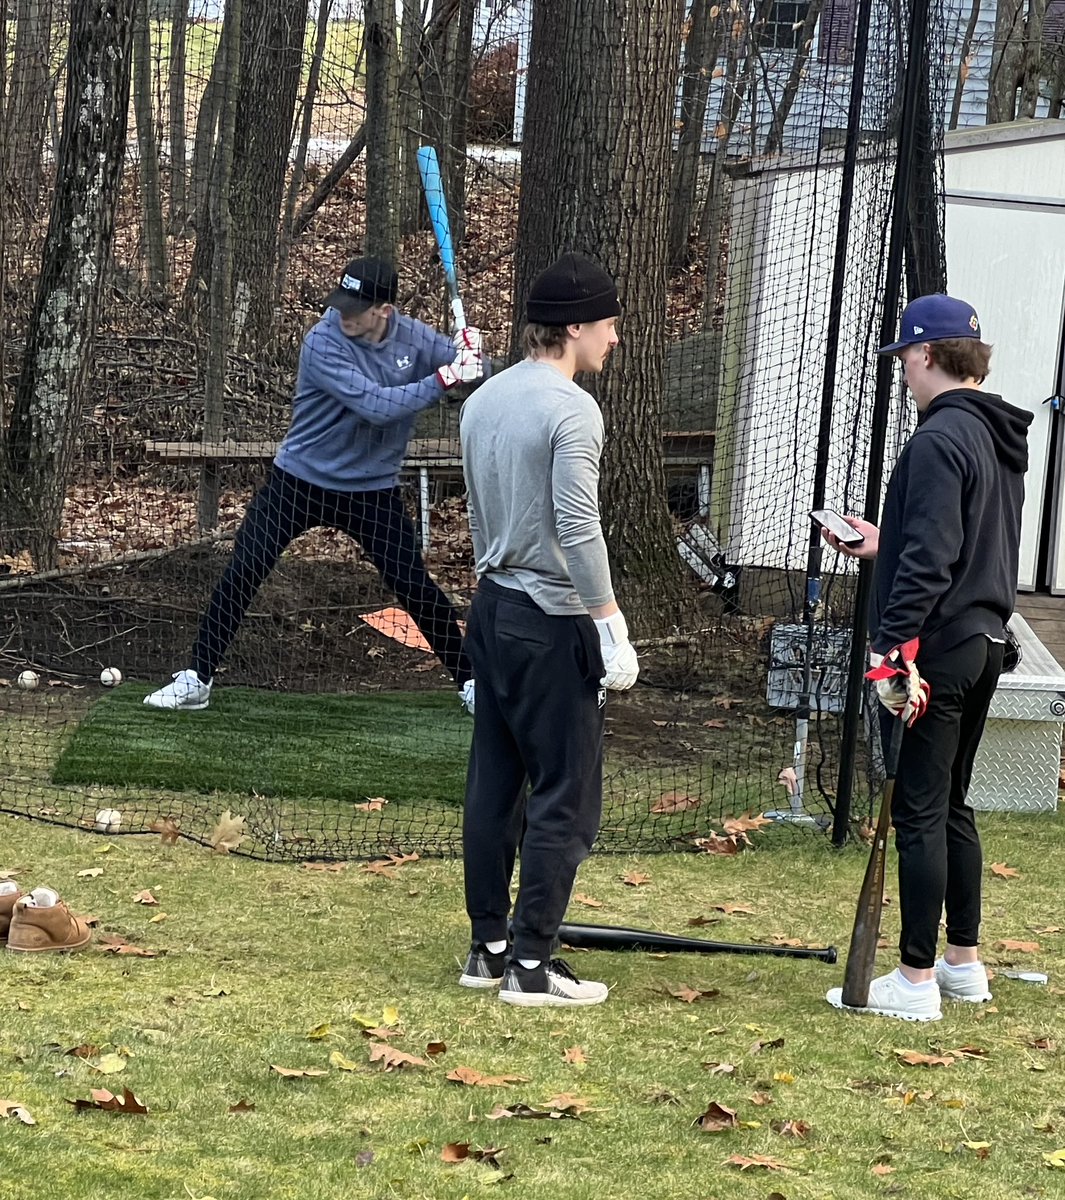 Post 21 and CHS’s BrooksCraigue 23’ (Merrimack College),Mitch Coffey 24’ (CHS) and Ryan Kastle 21’ (St.Joe’s) taking some holiday swings while home on college break